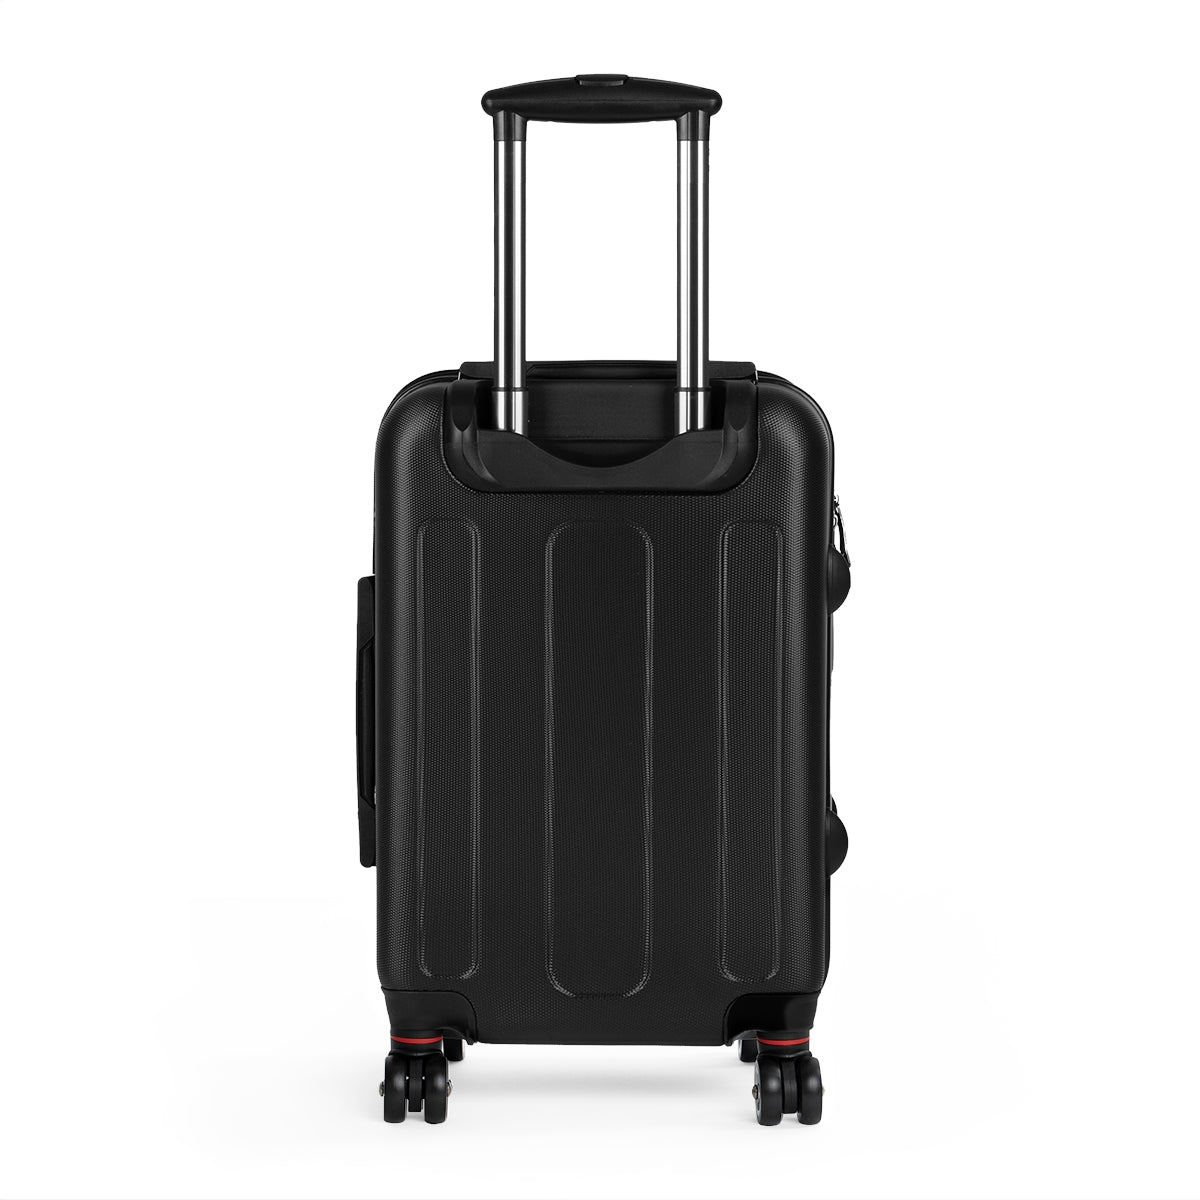 Around the World V2 Carry-on Luggage